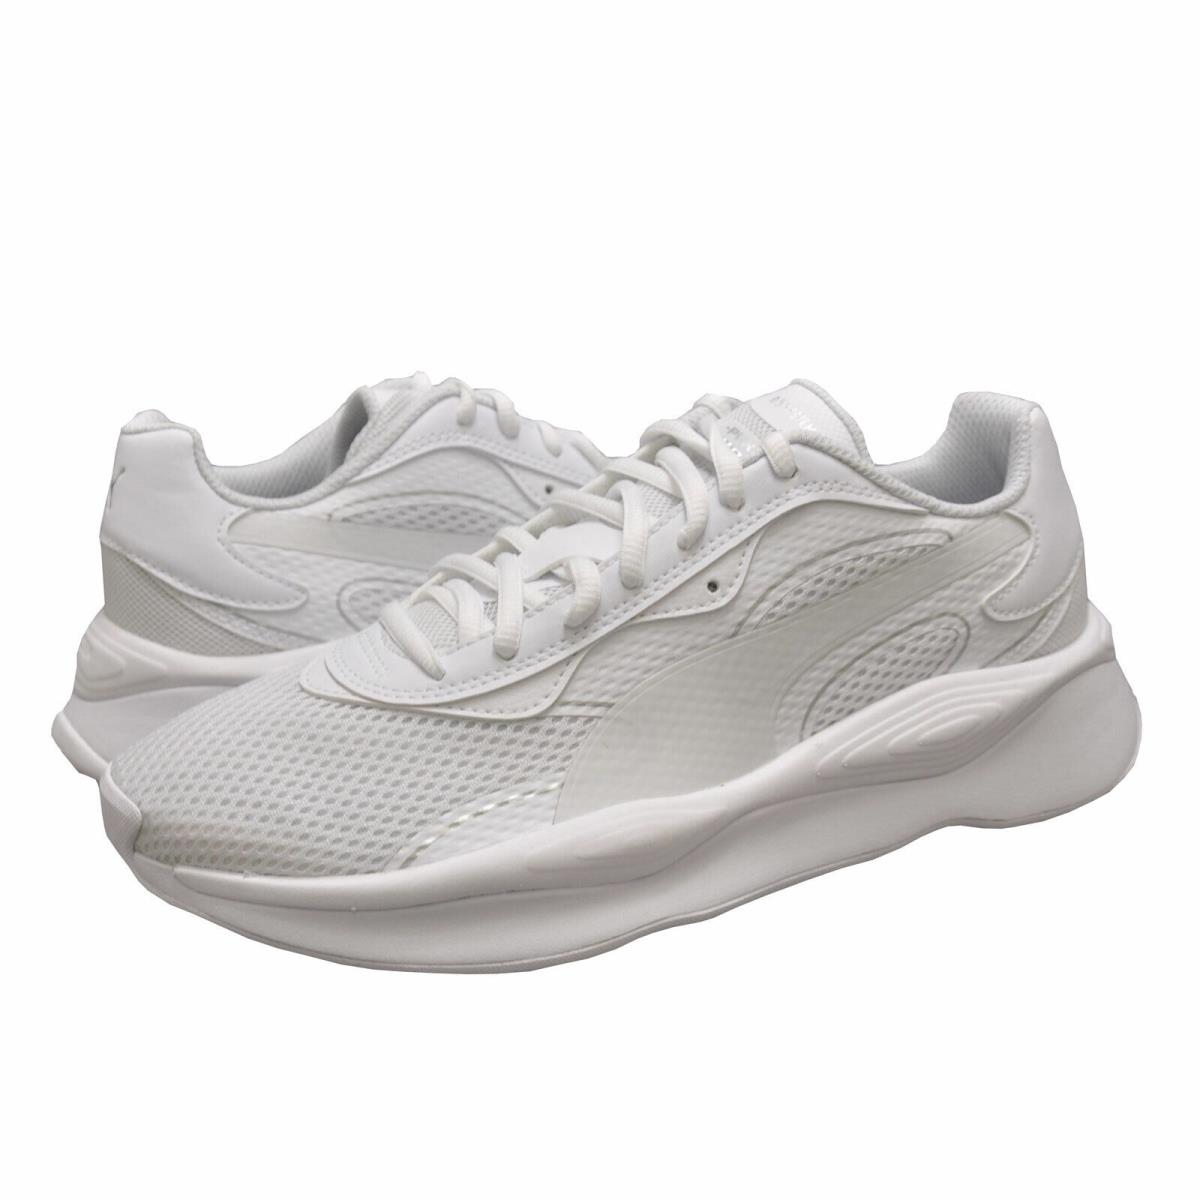 Men`s Shoes Puma Rs-pure Base Casual Athletic Train Sneakers 372251-01 White